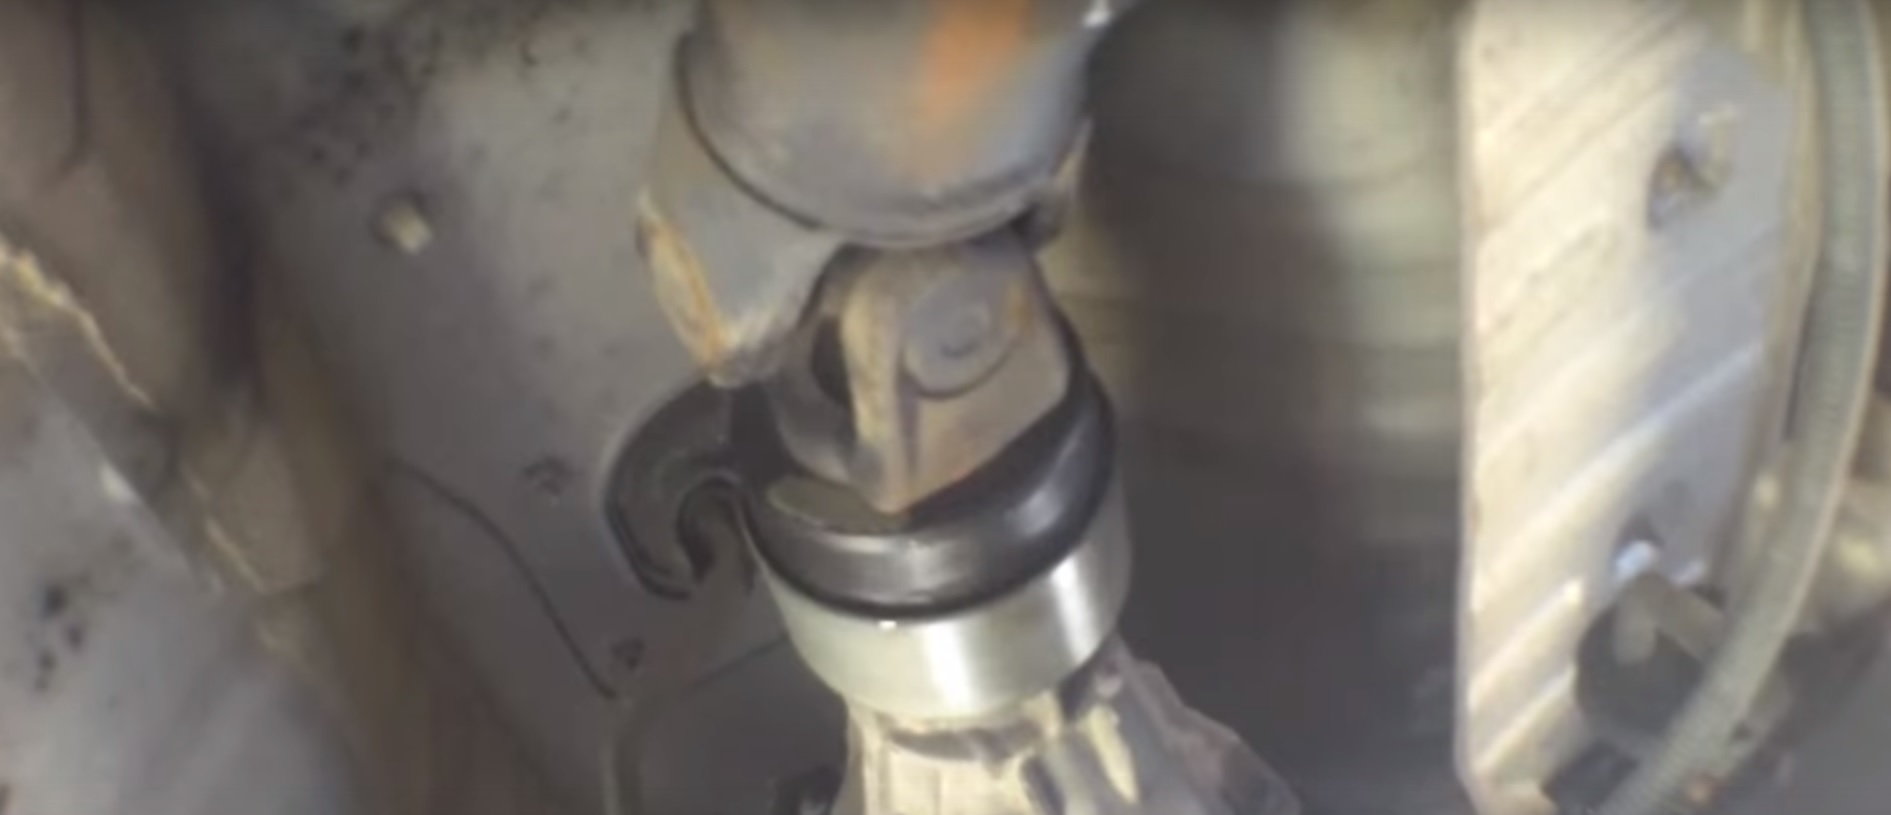 toyota tacoma driveshaft replacement how to DIY